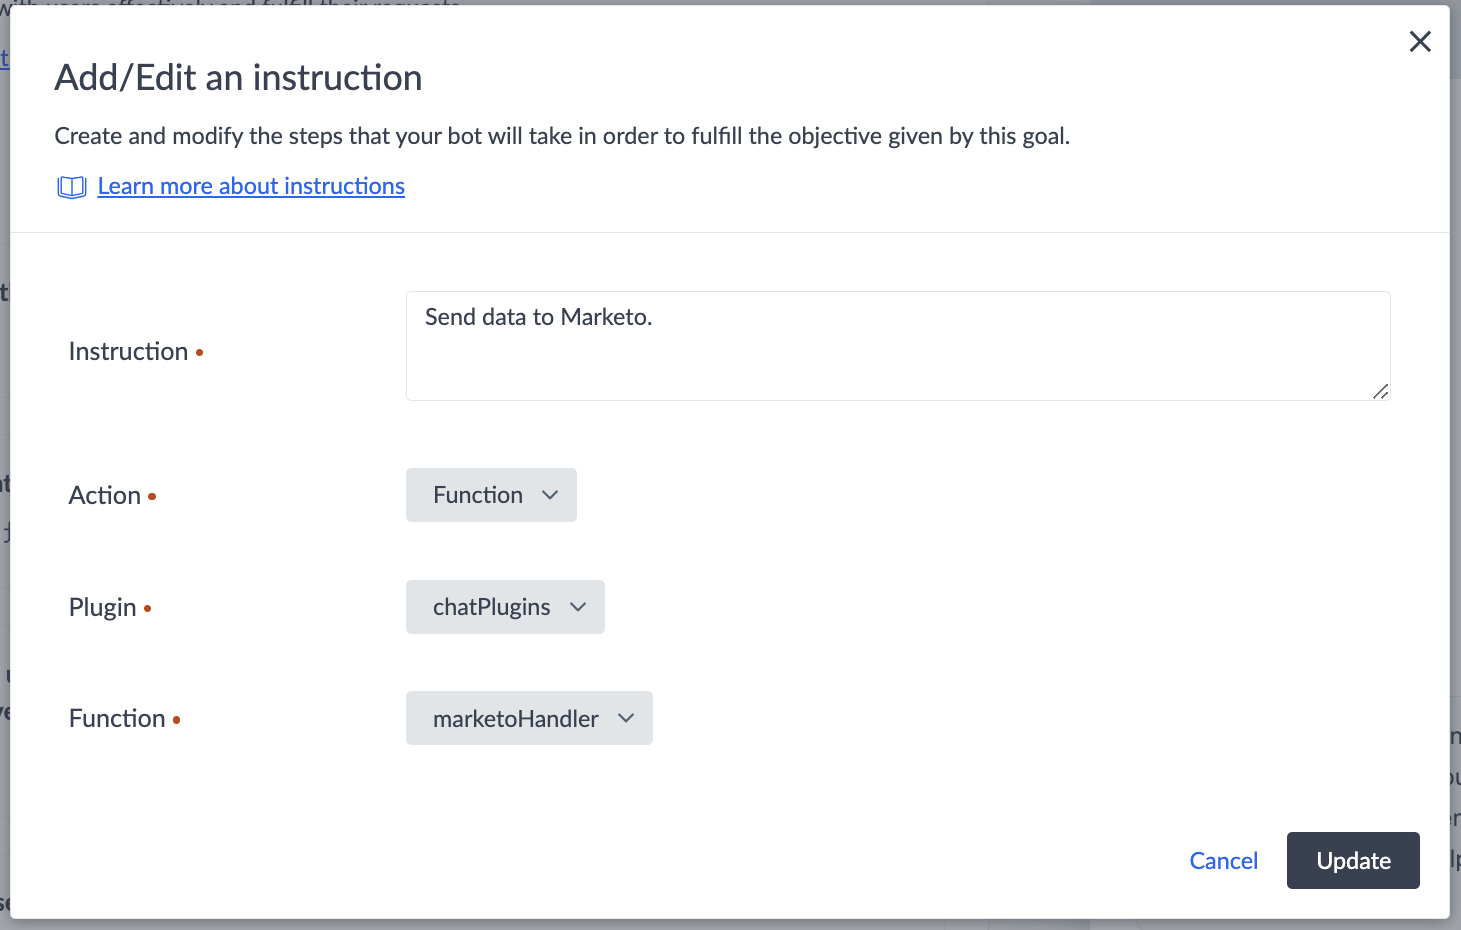 Function instruction configuration in edit instruction modal